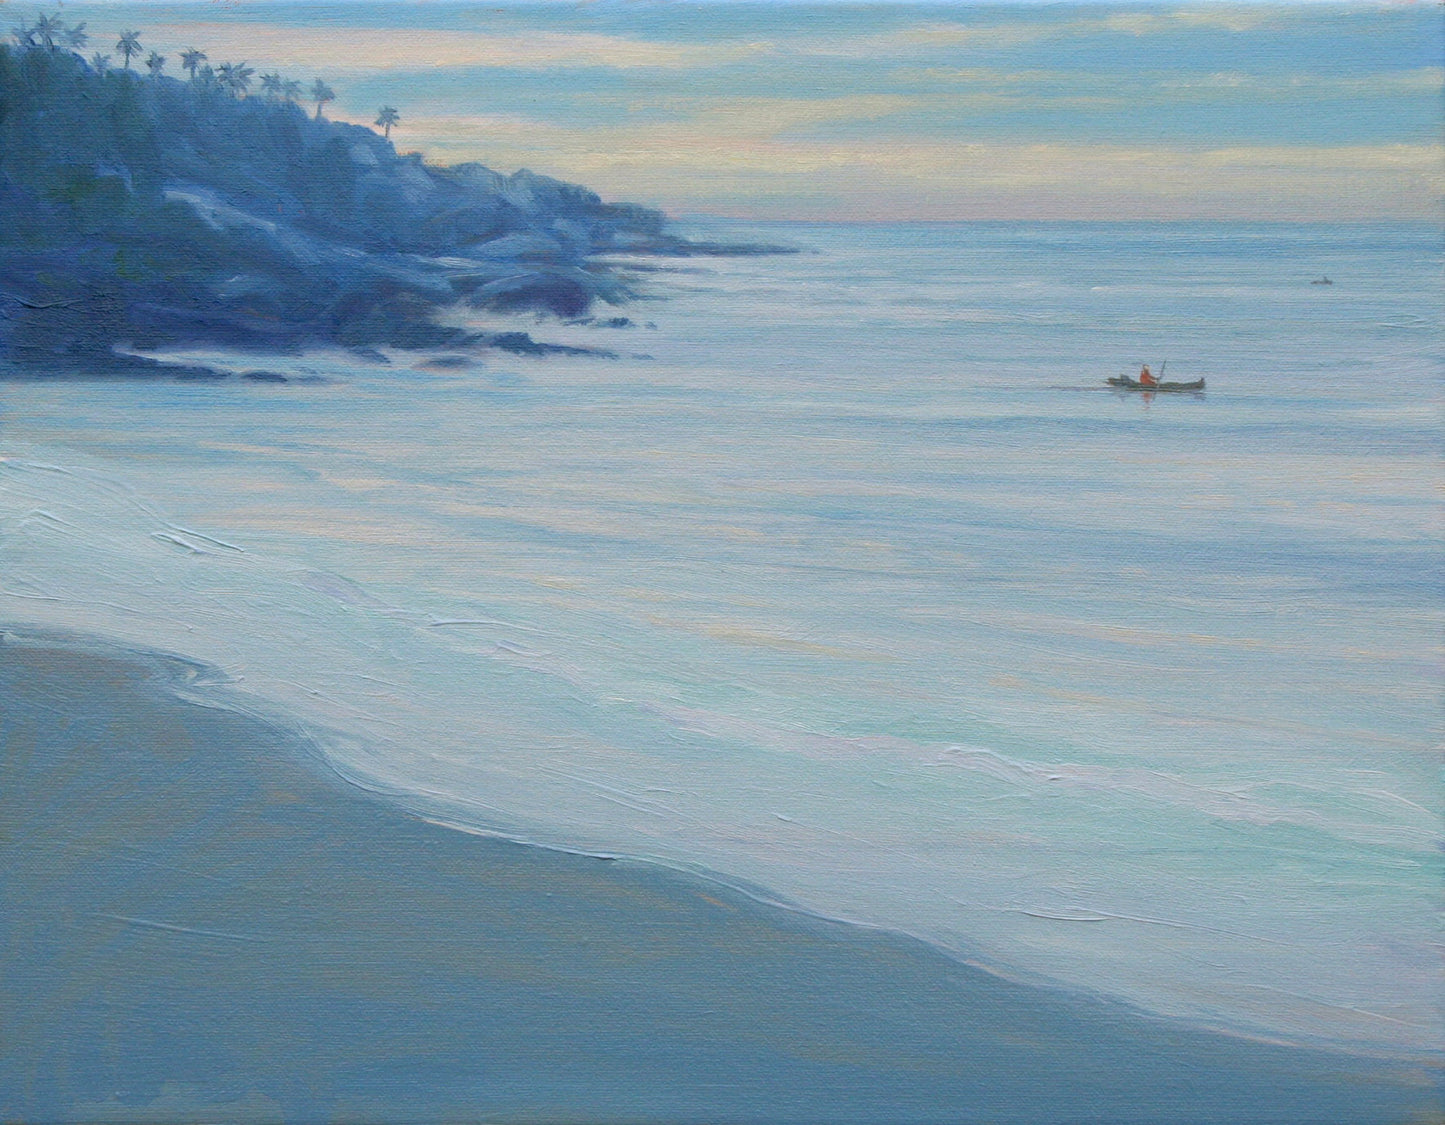 Fishing Off Kovallum. 18 x 14 ins. Seascape painting by Derek hare